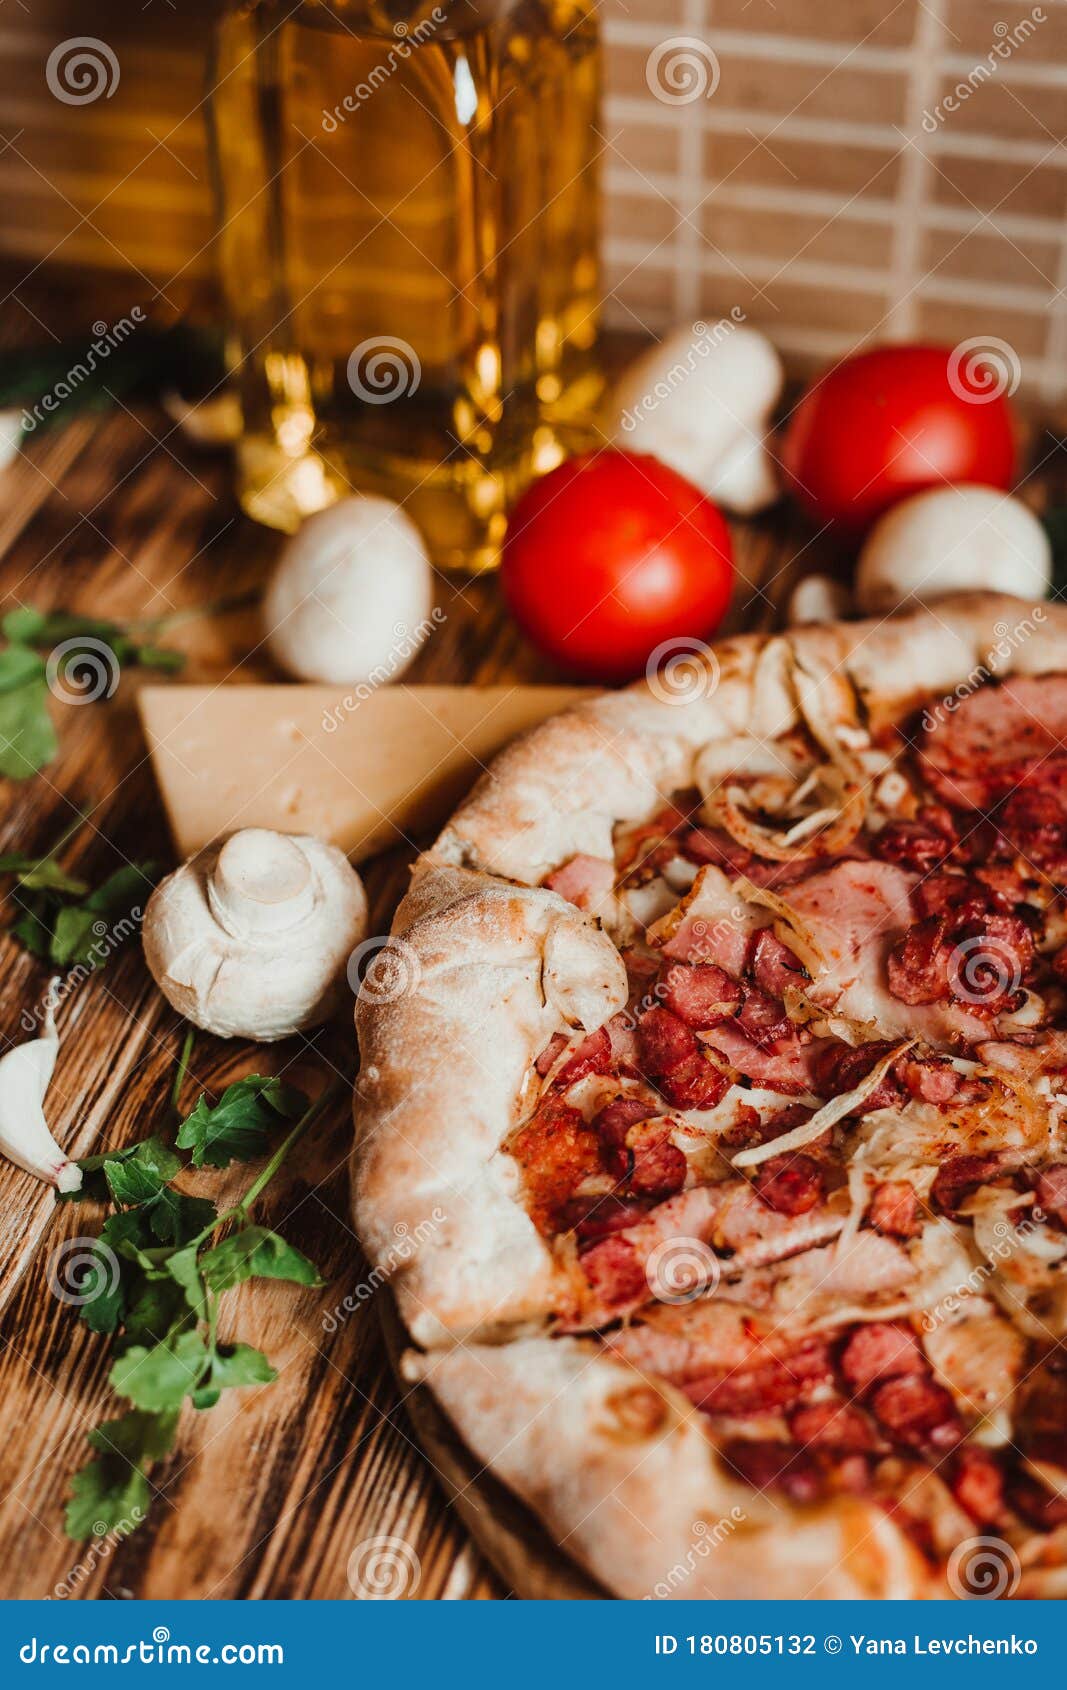 316 Pizza Transparent Photos Free Royalty Free Stock Photos From Dreamstime